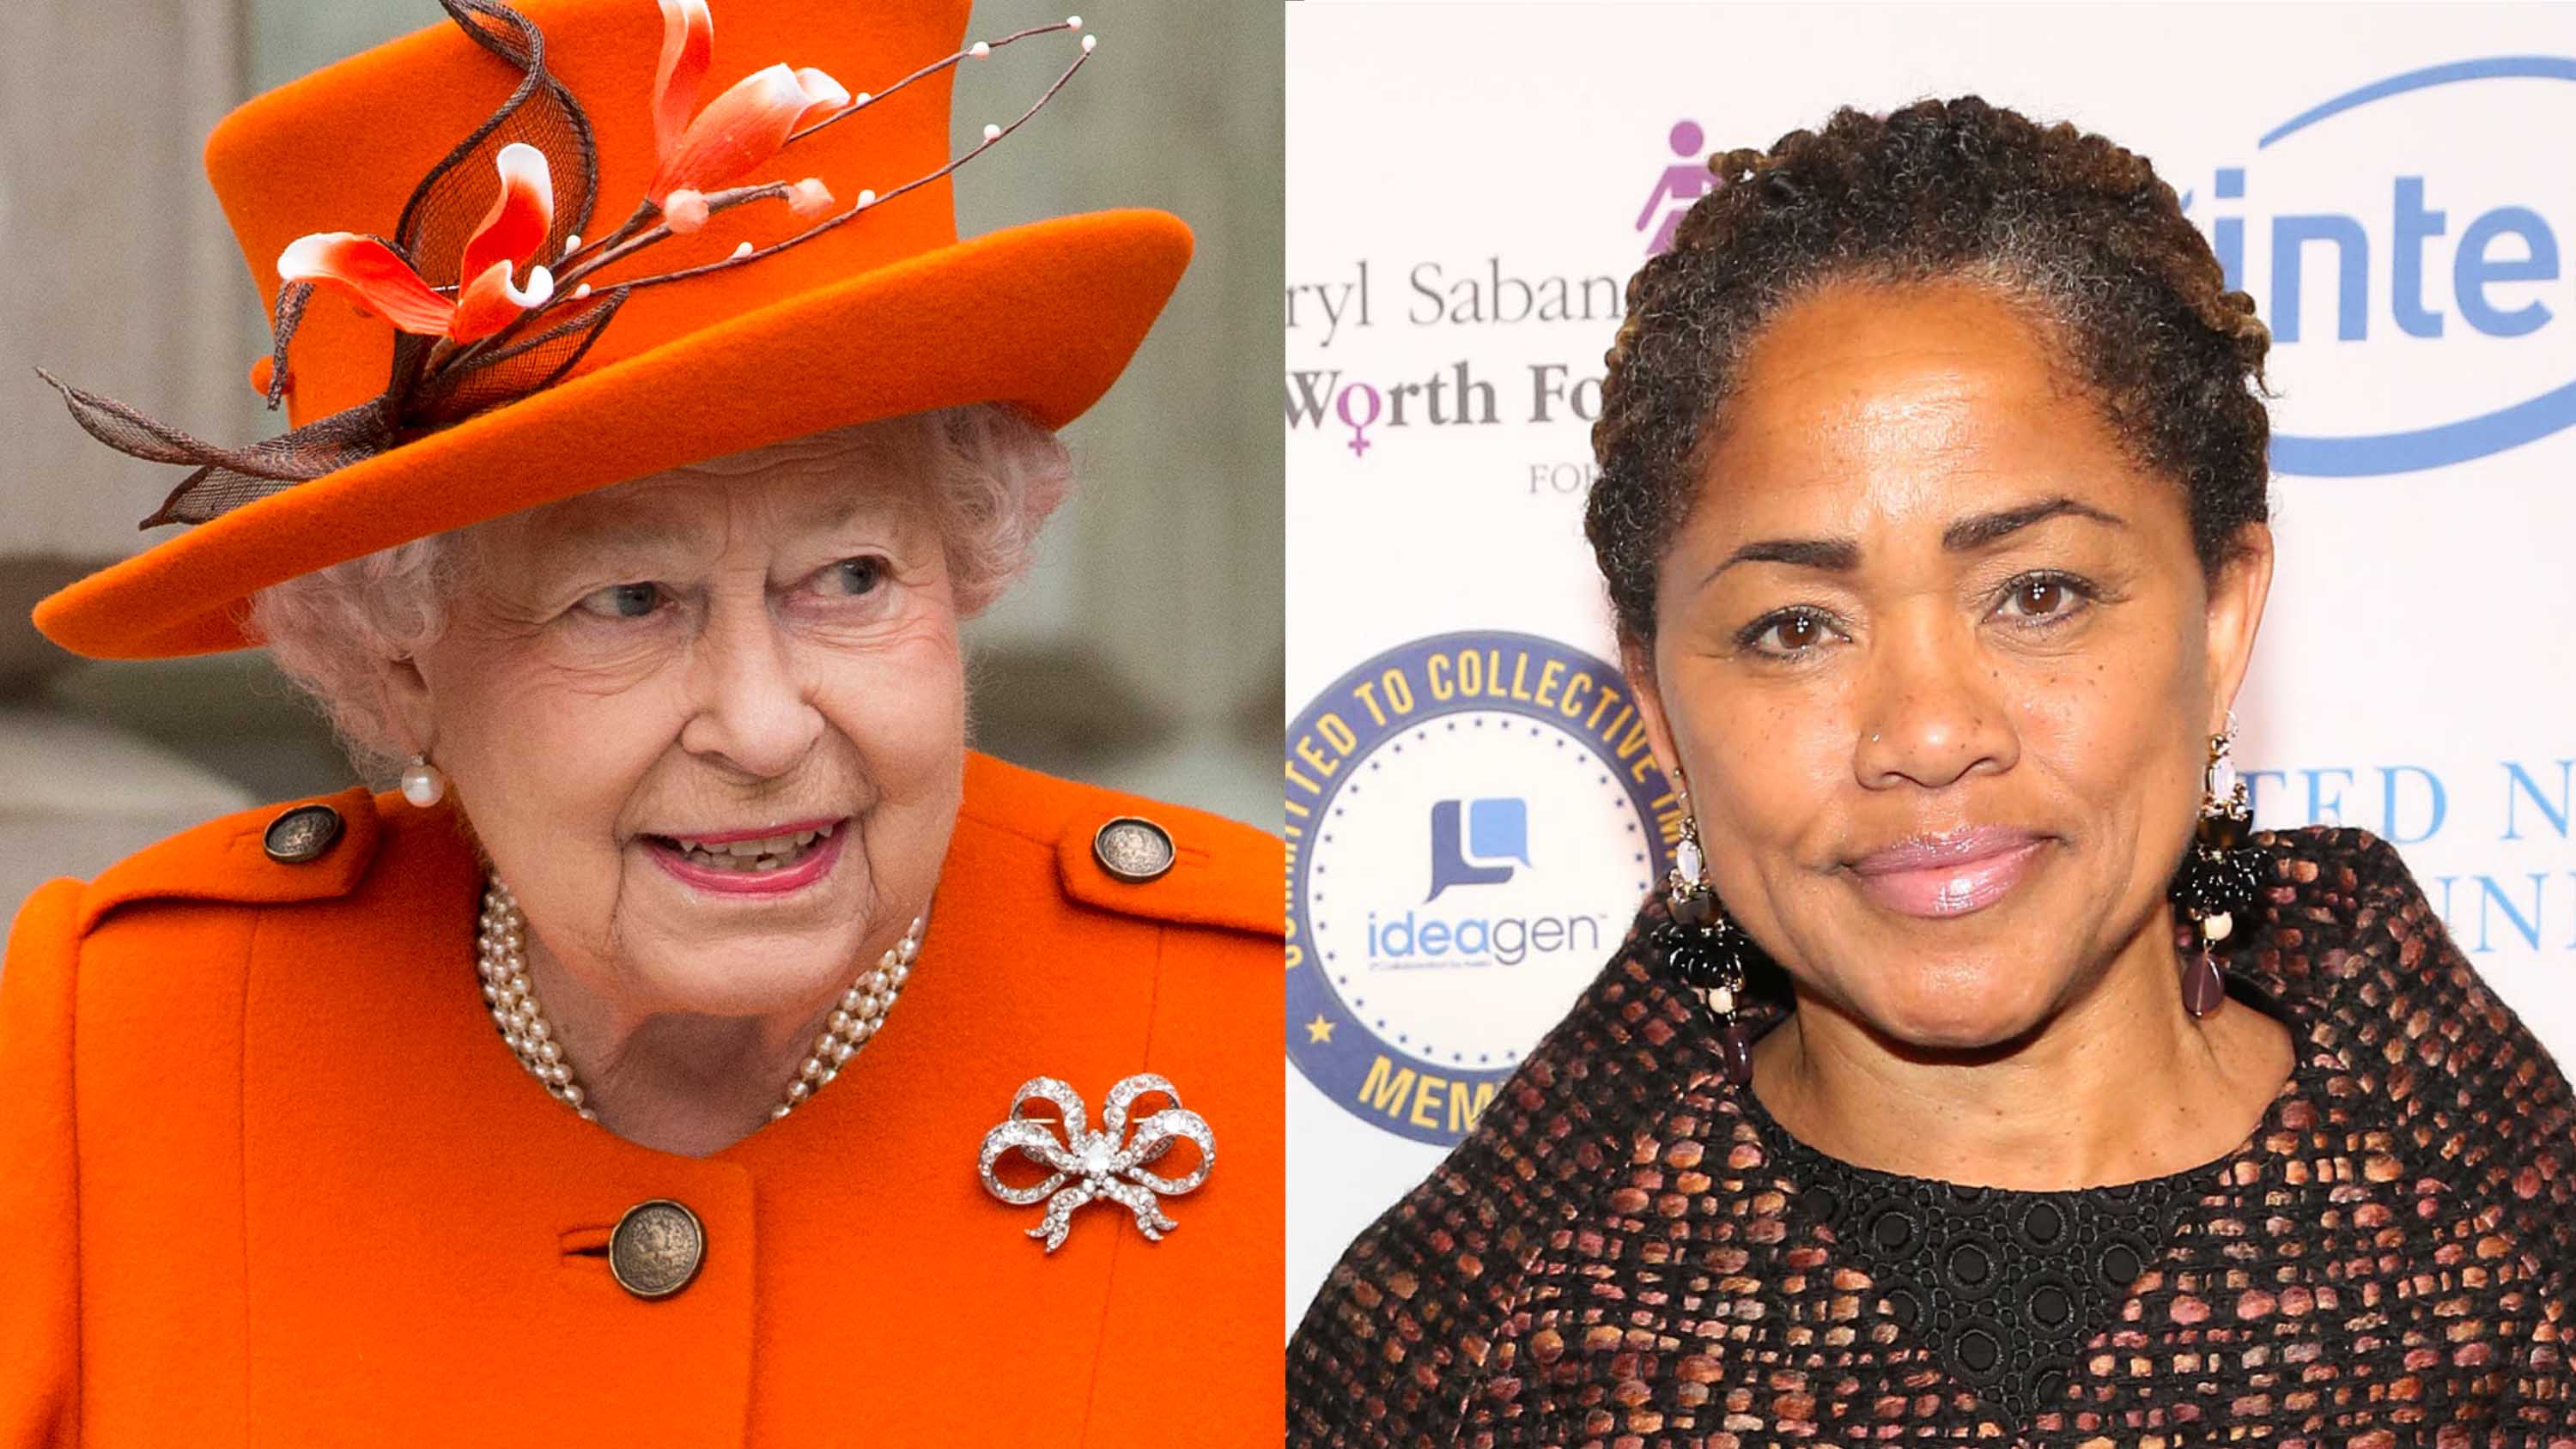 Queen, Prince Charles and Doria Ragland arrive for wedding 